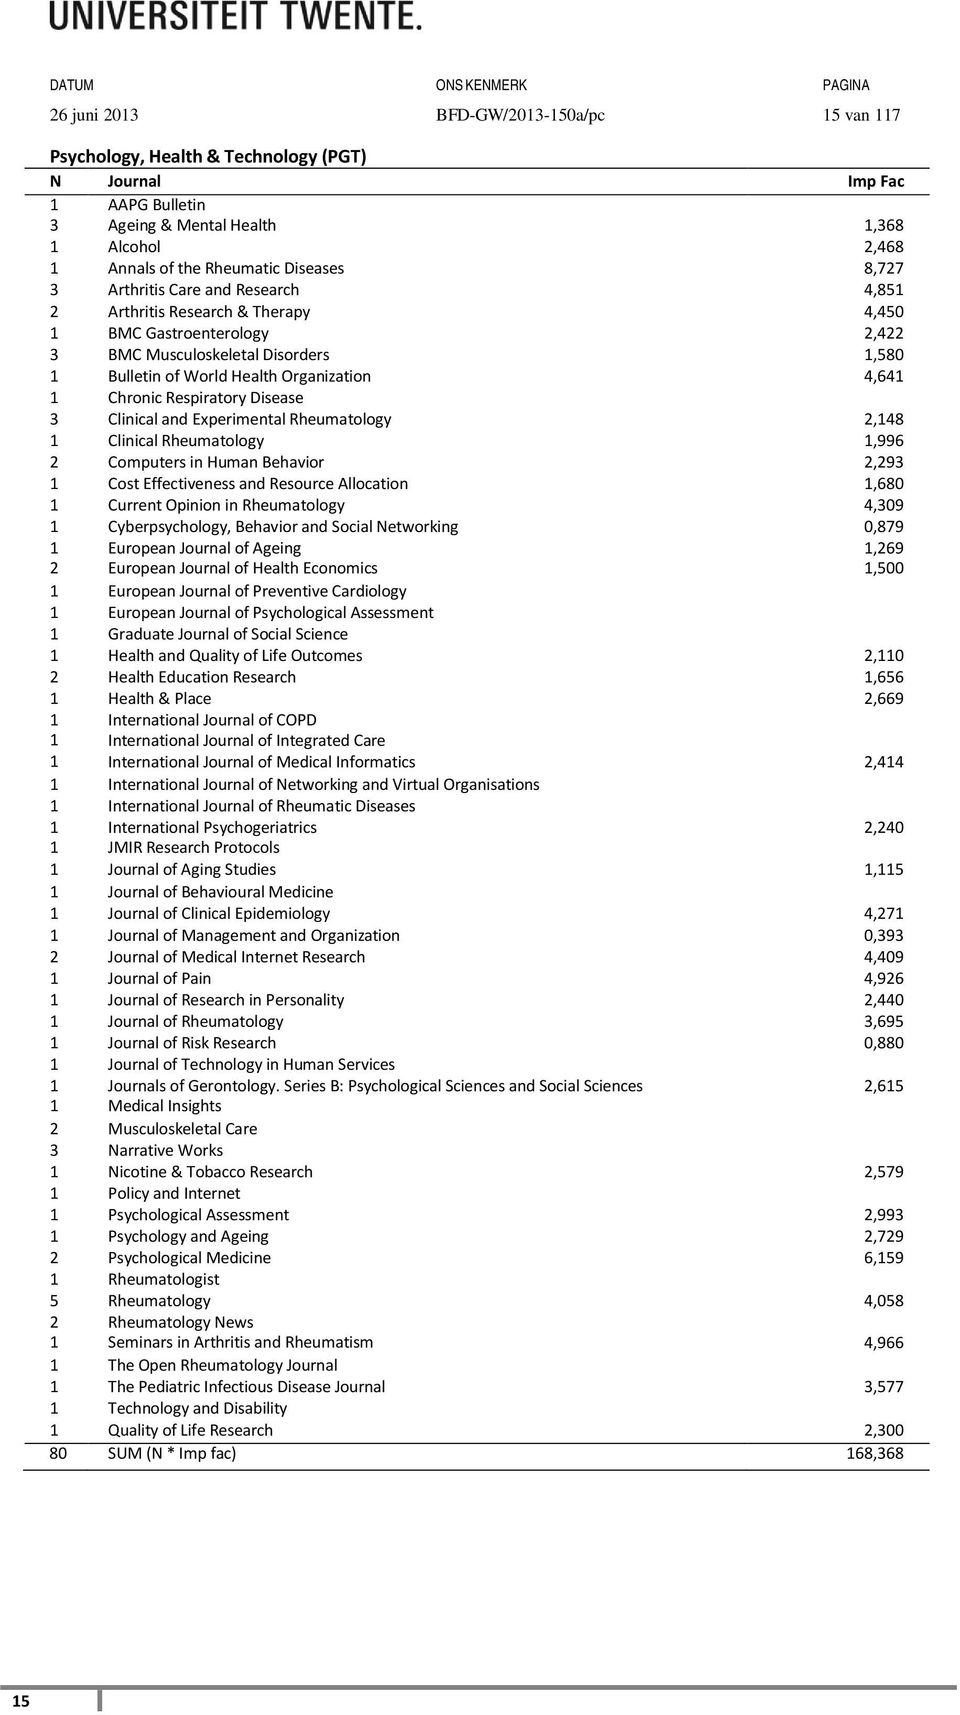 Rheumatology 2,48 Clinical Rheumatology,996 2 Computers in Human Behavior 2,293 Cost Effectiveness and Resource Allocation,680 Current Opinion in Rheumatology 4,309 Cyberpsychology, Behavior and